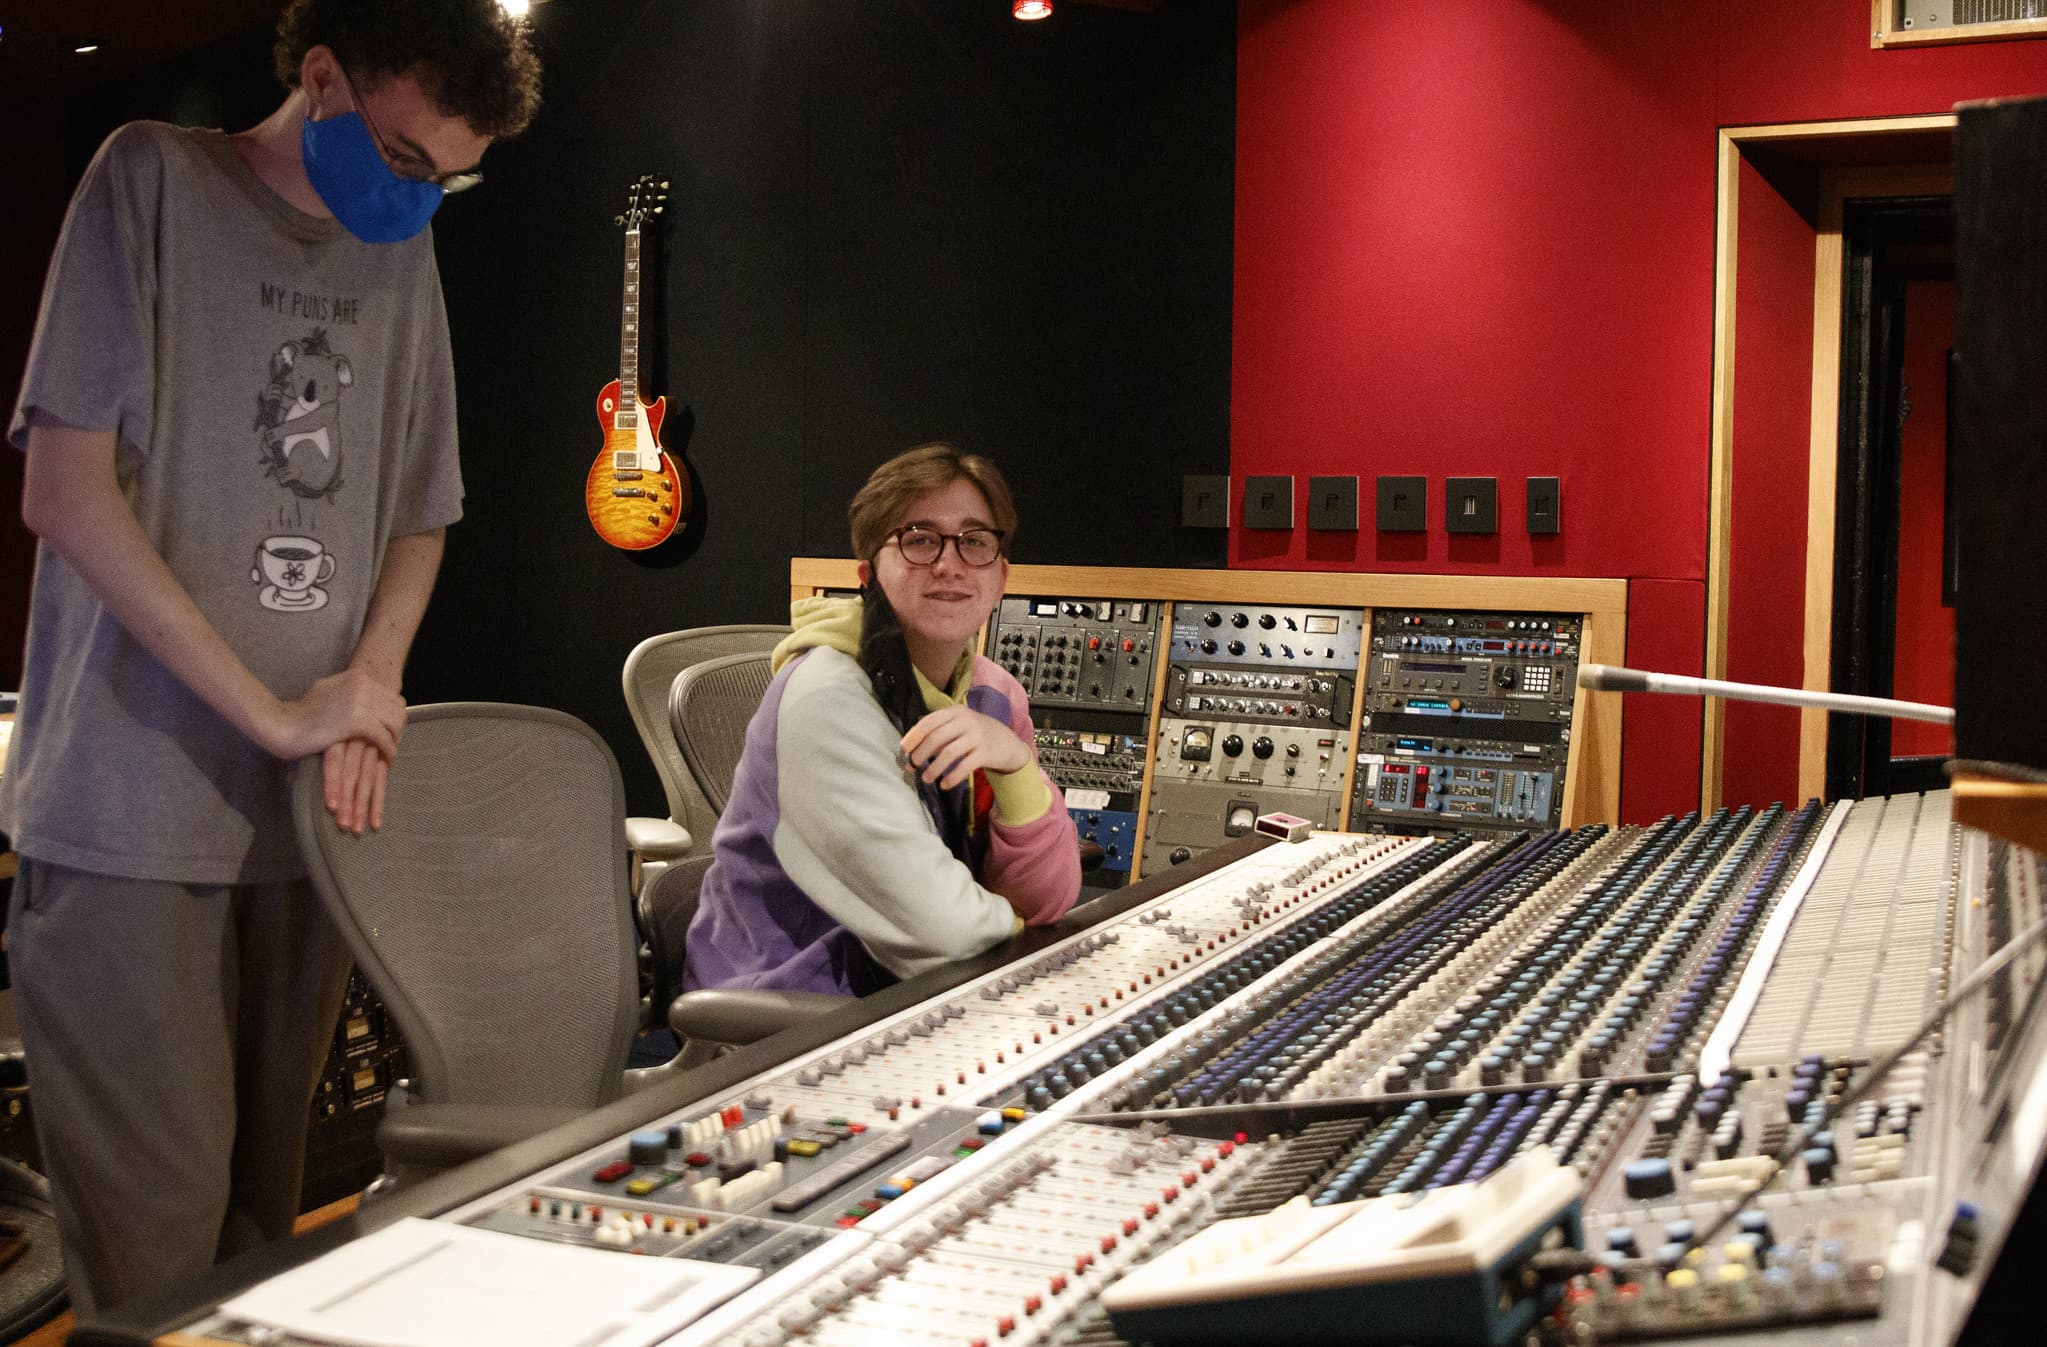 campers at the Neve 8078 console